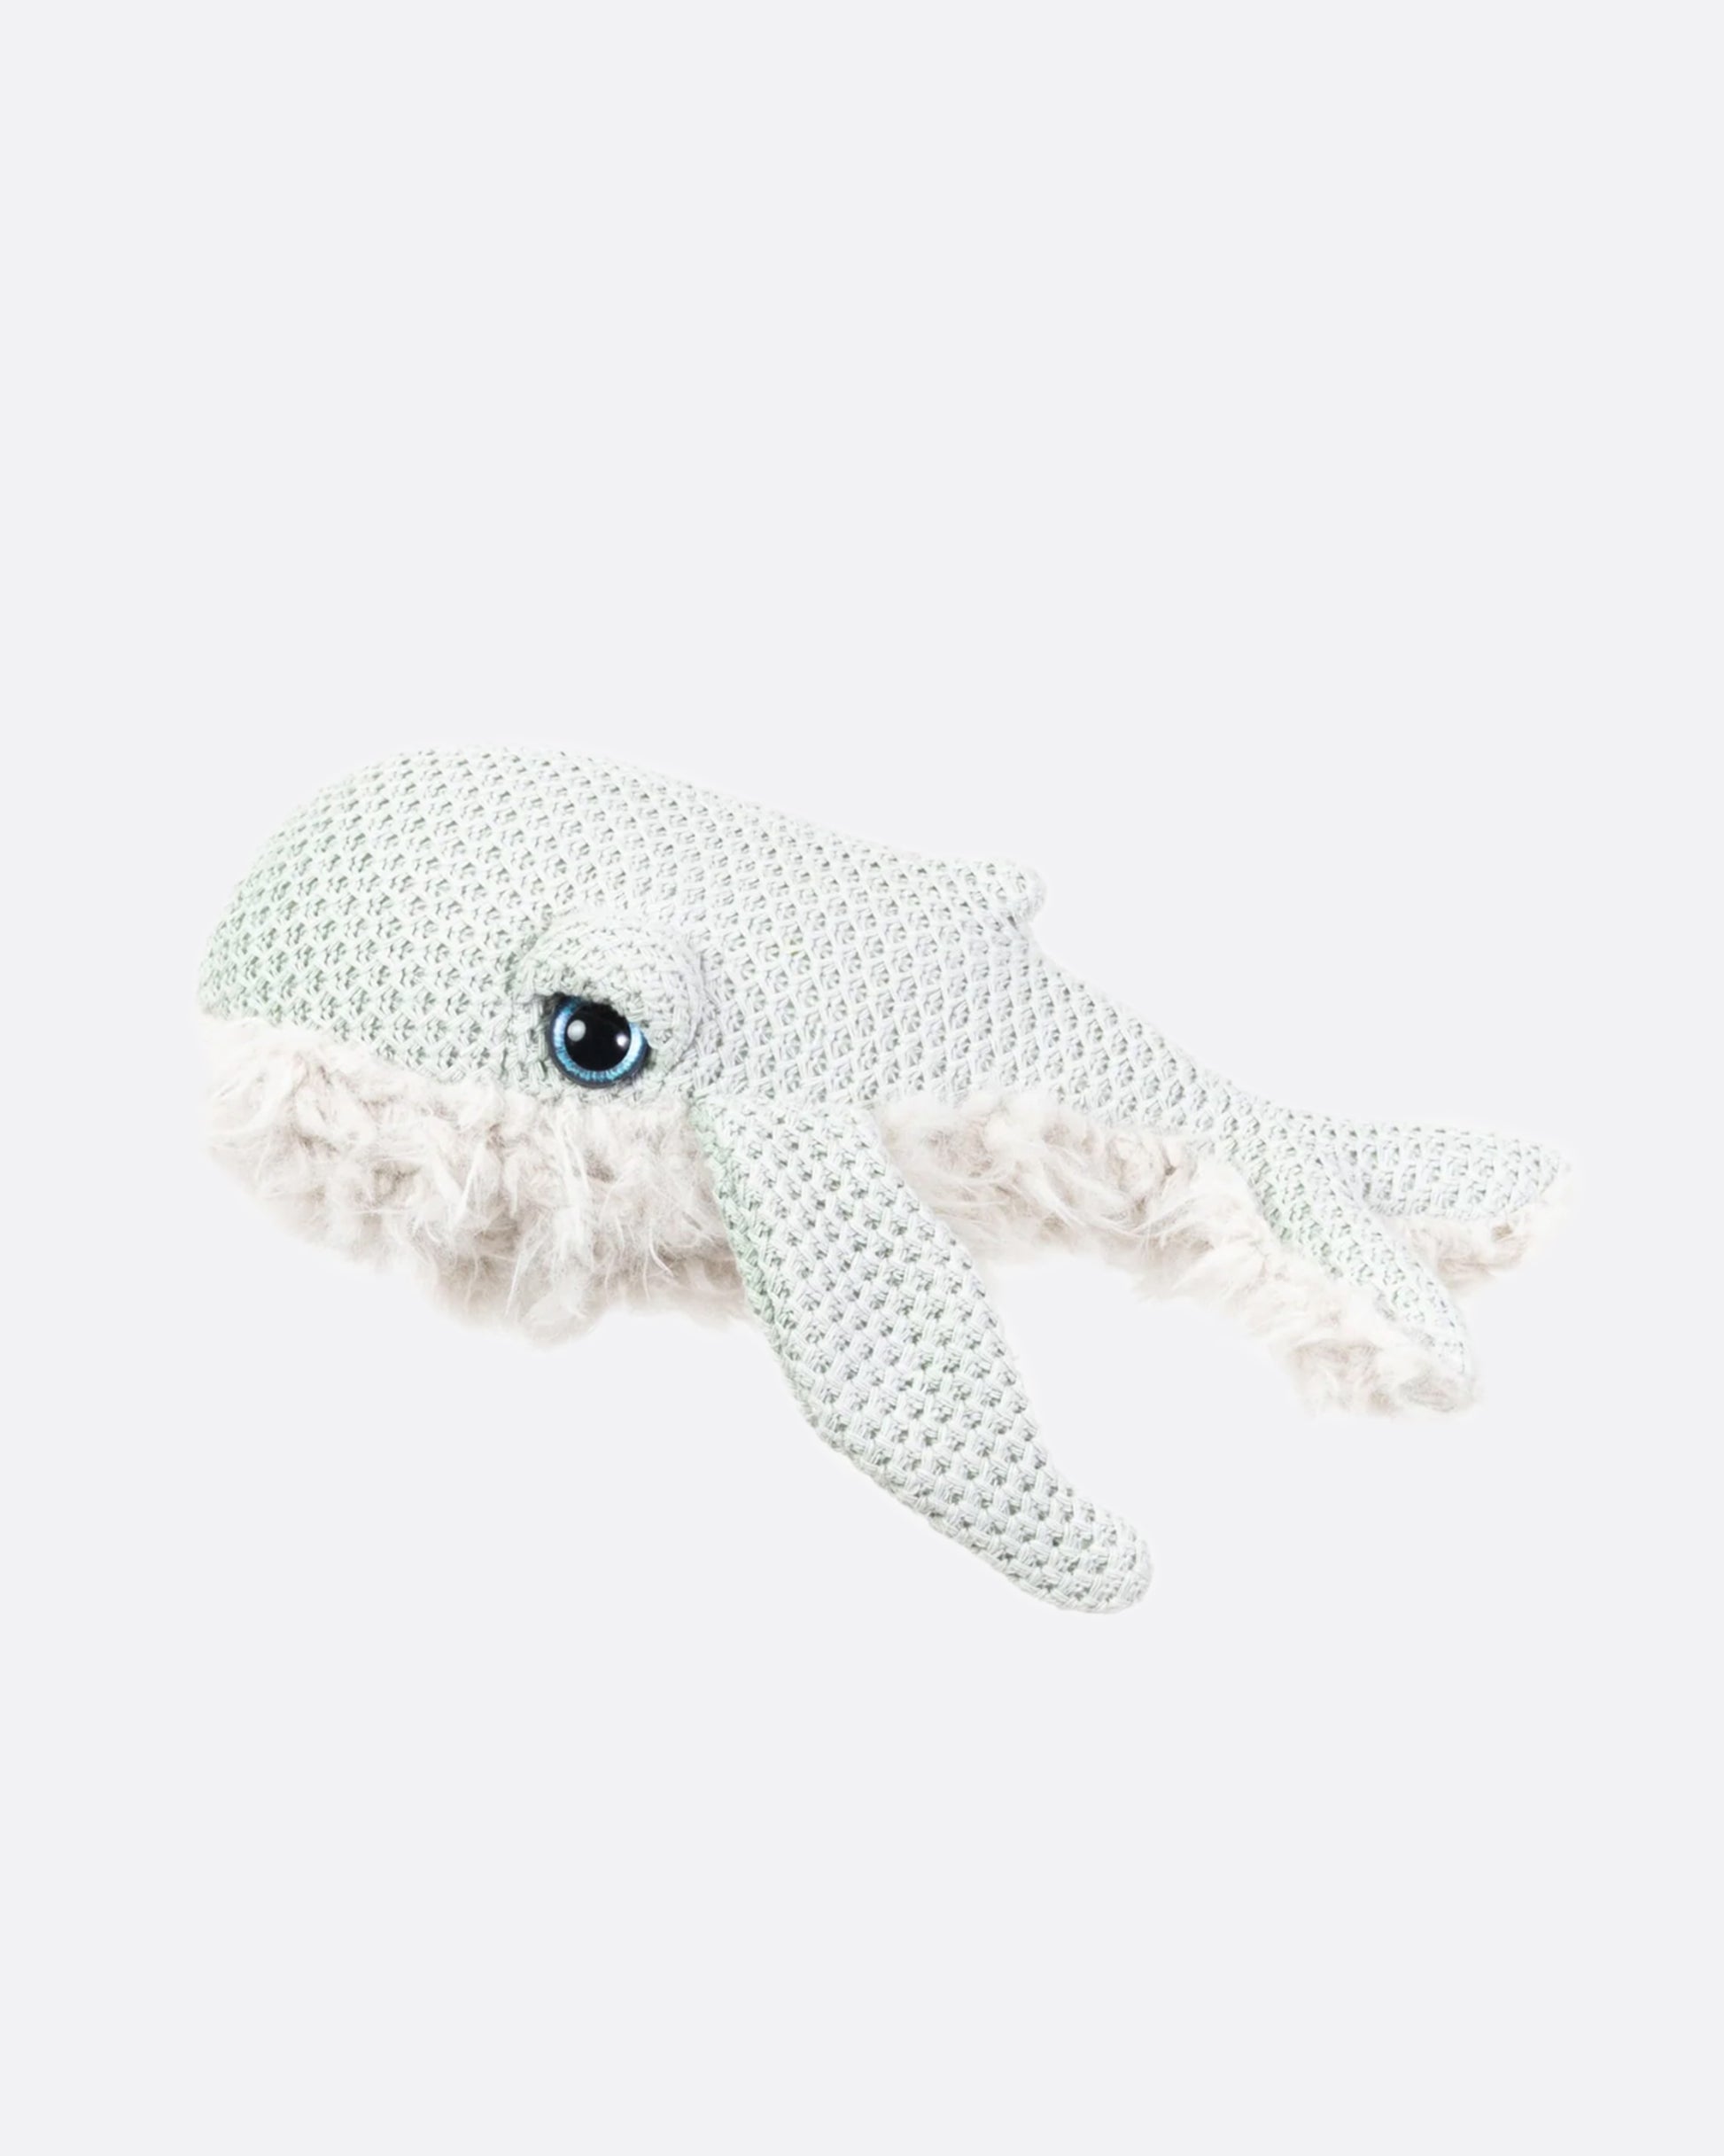 This little whale is made with sturdy stitching to allow your little one to carry it around with them for out-of-this-world adventures anytime, anywhere.